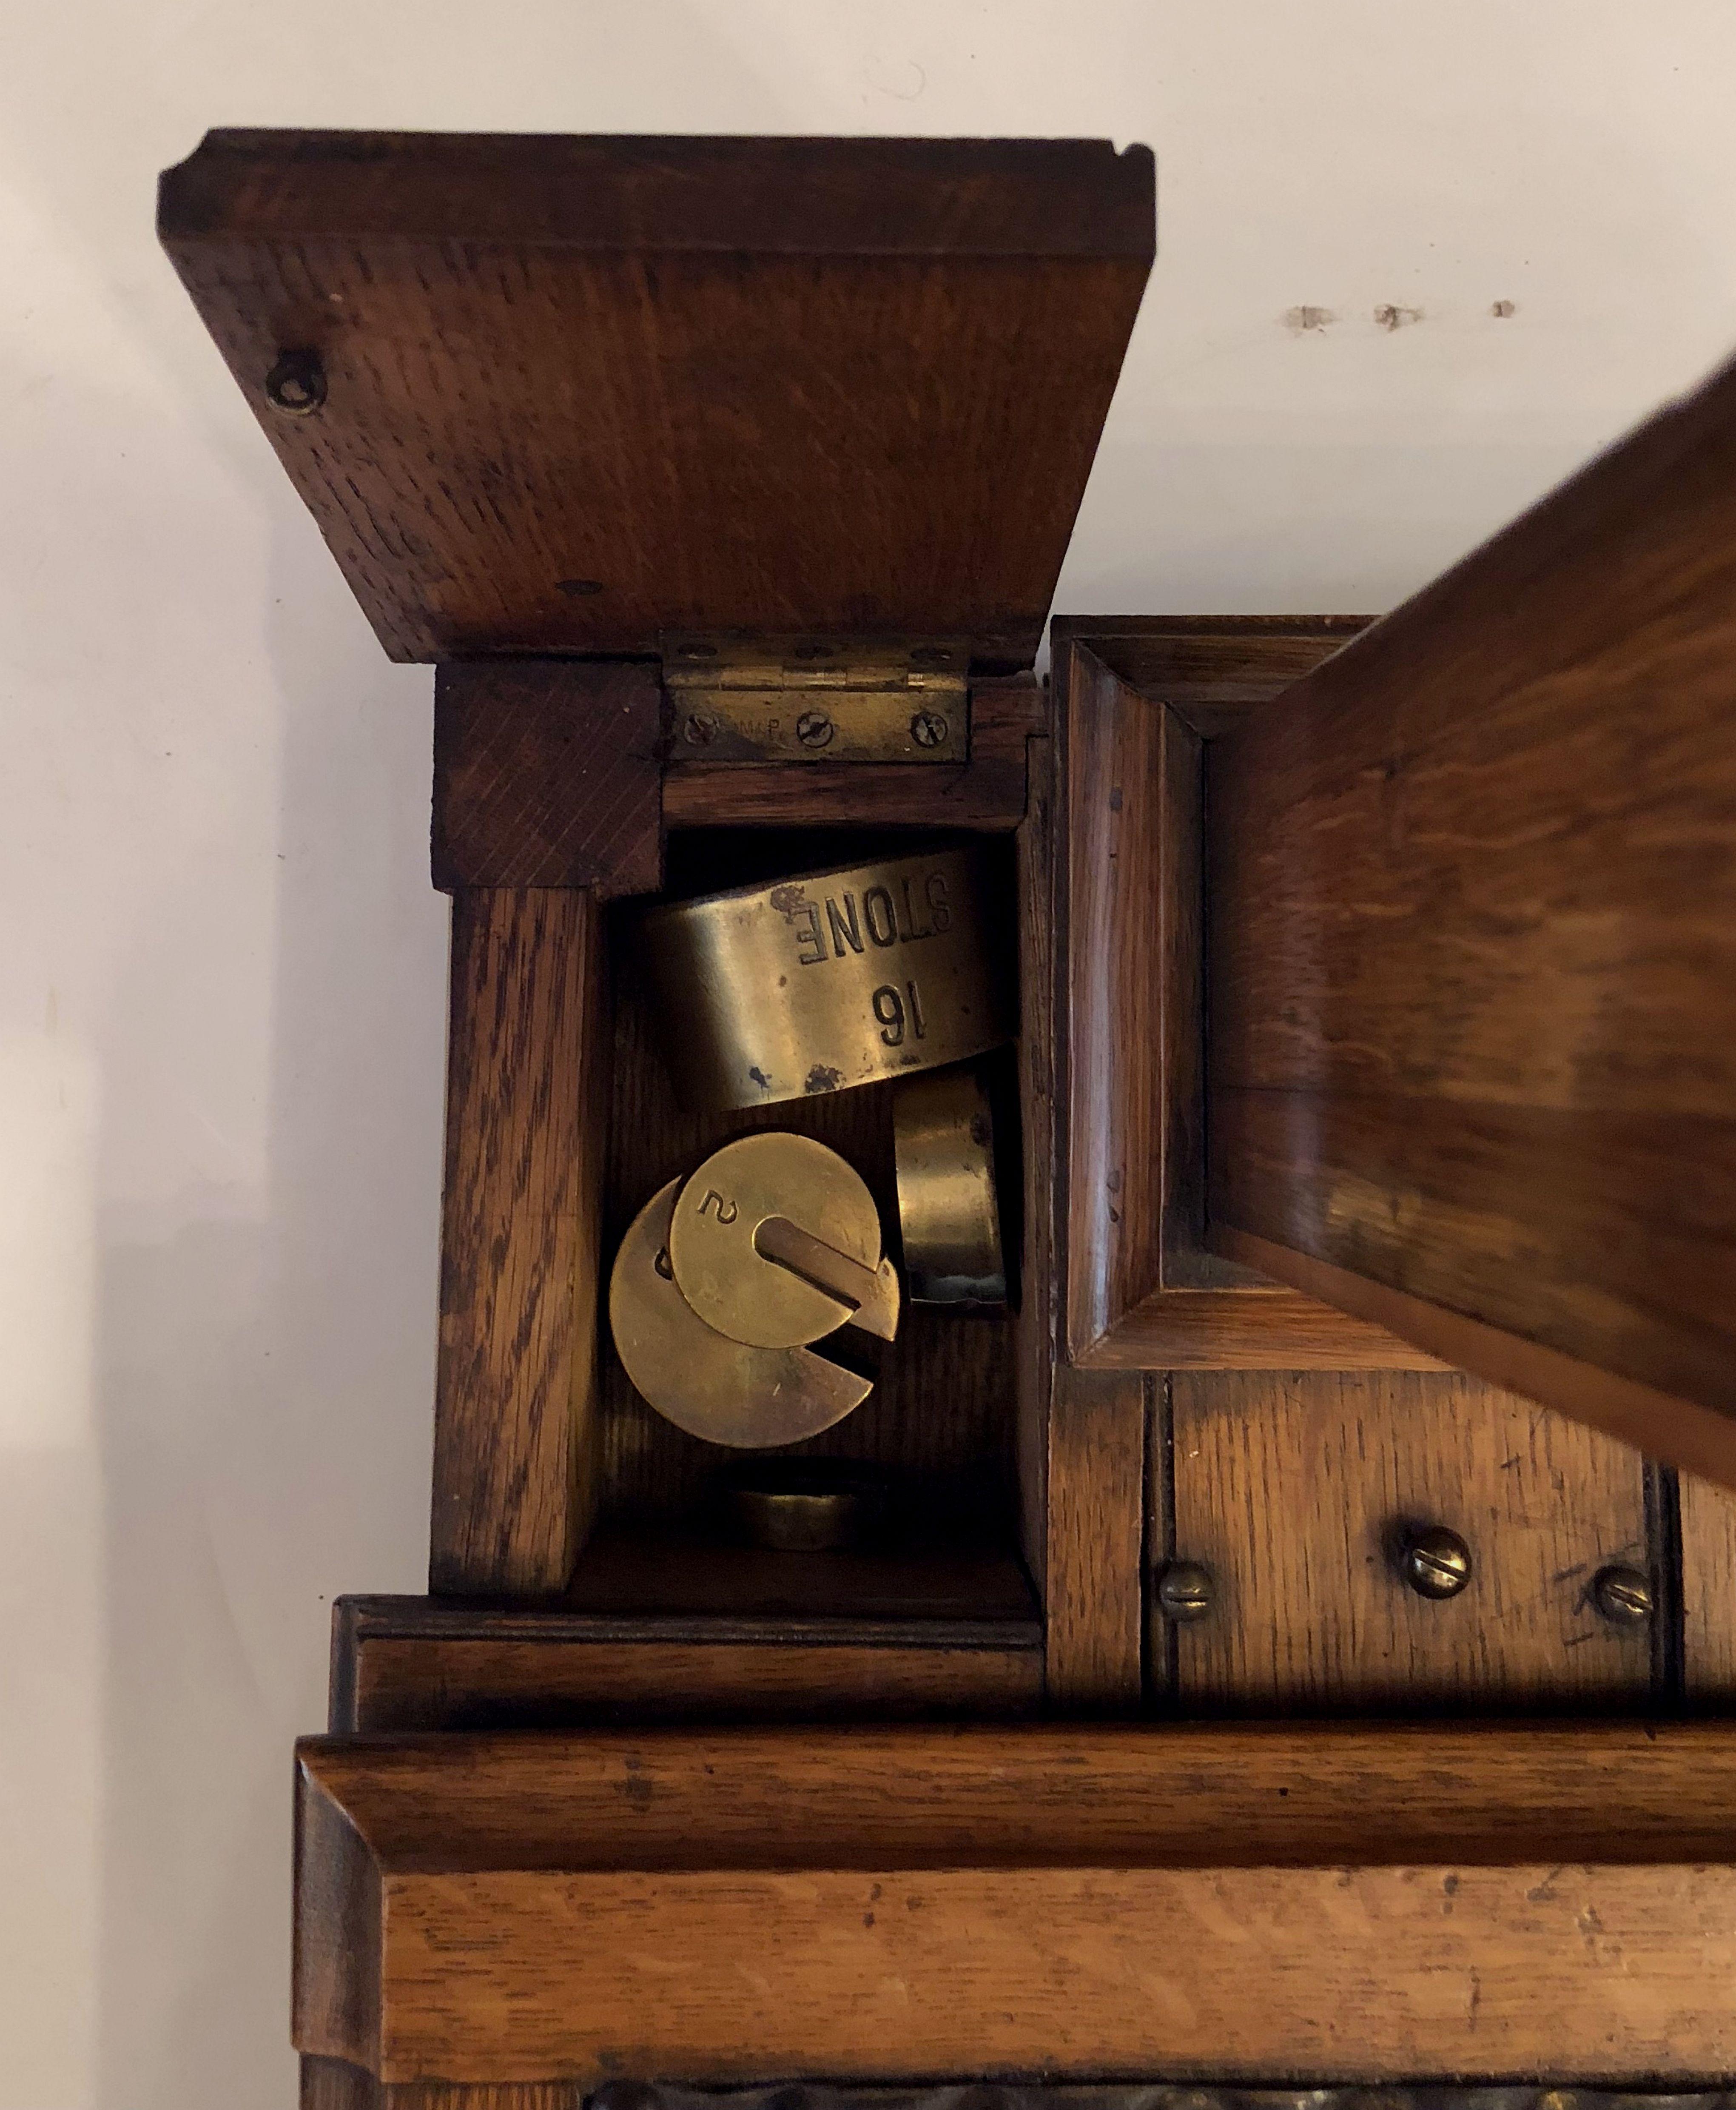 English British Athlete's Personal Floor Standing Scale of Oak, Boxwood, and Brass